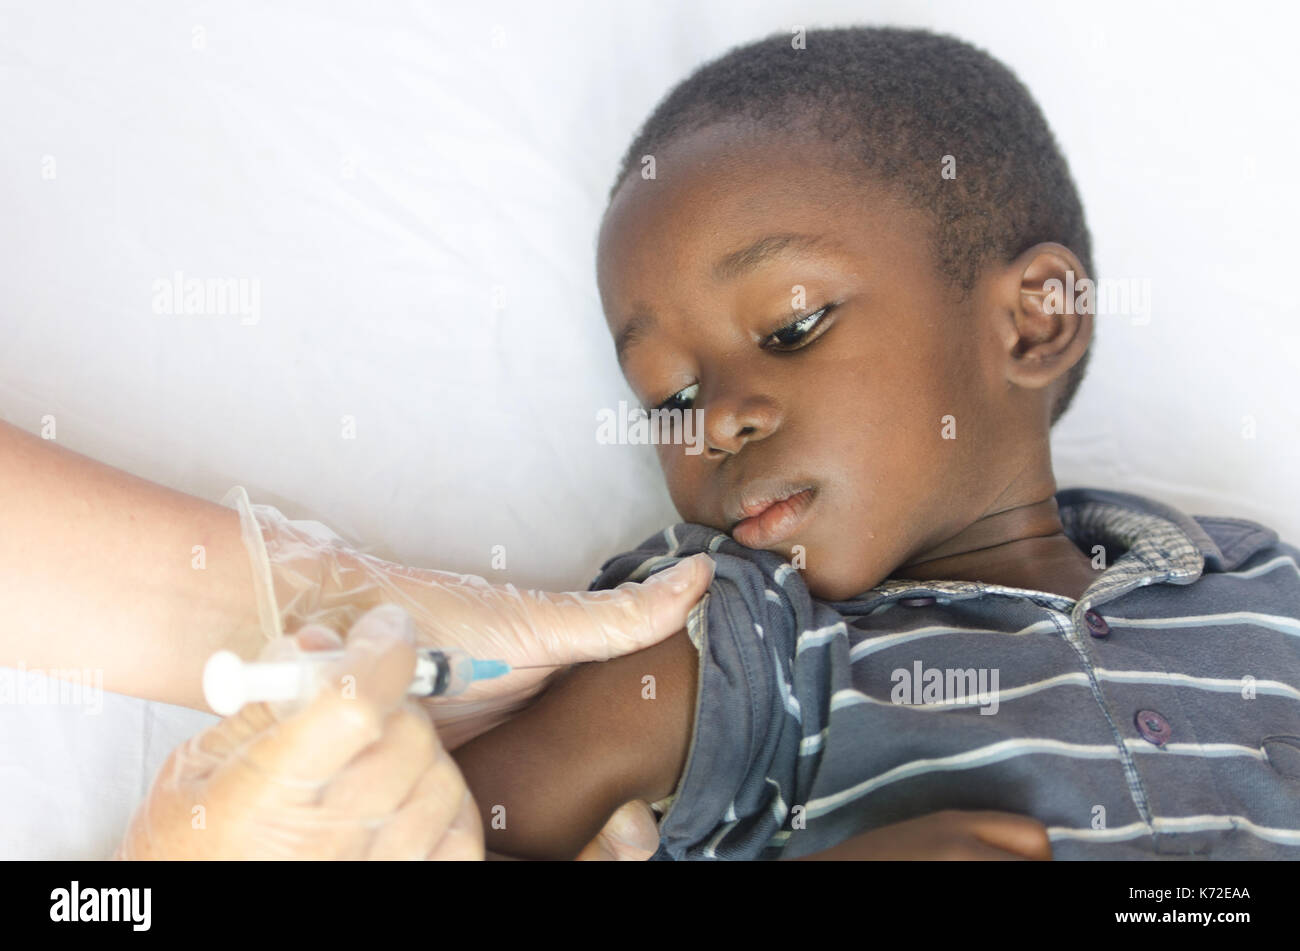 Healthcare and Medical symbol: african black boy gets a vaccination needle Stock Photo